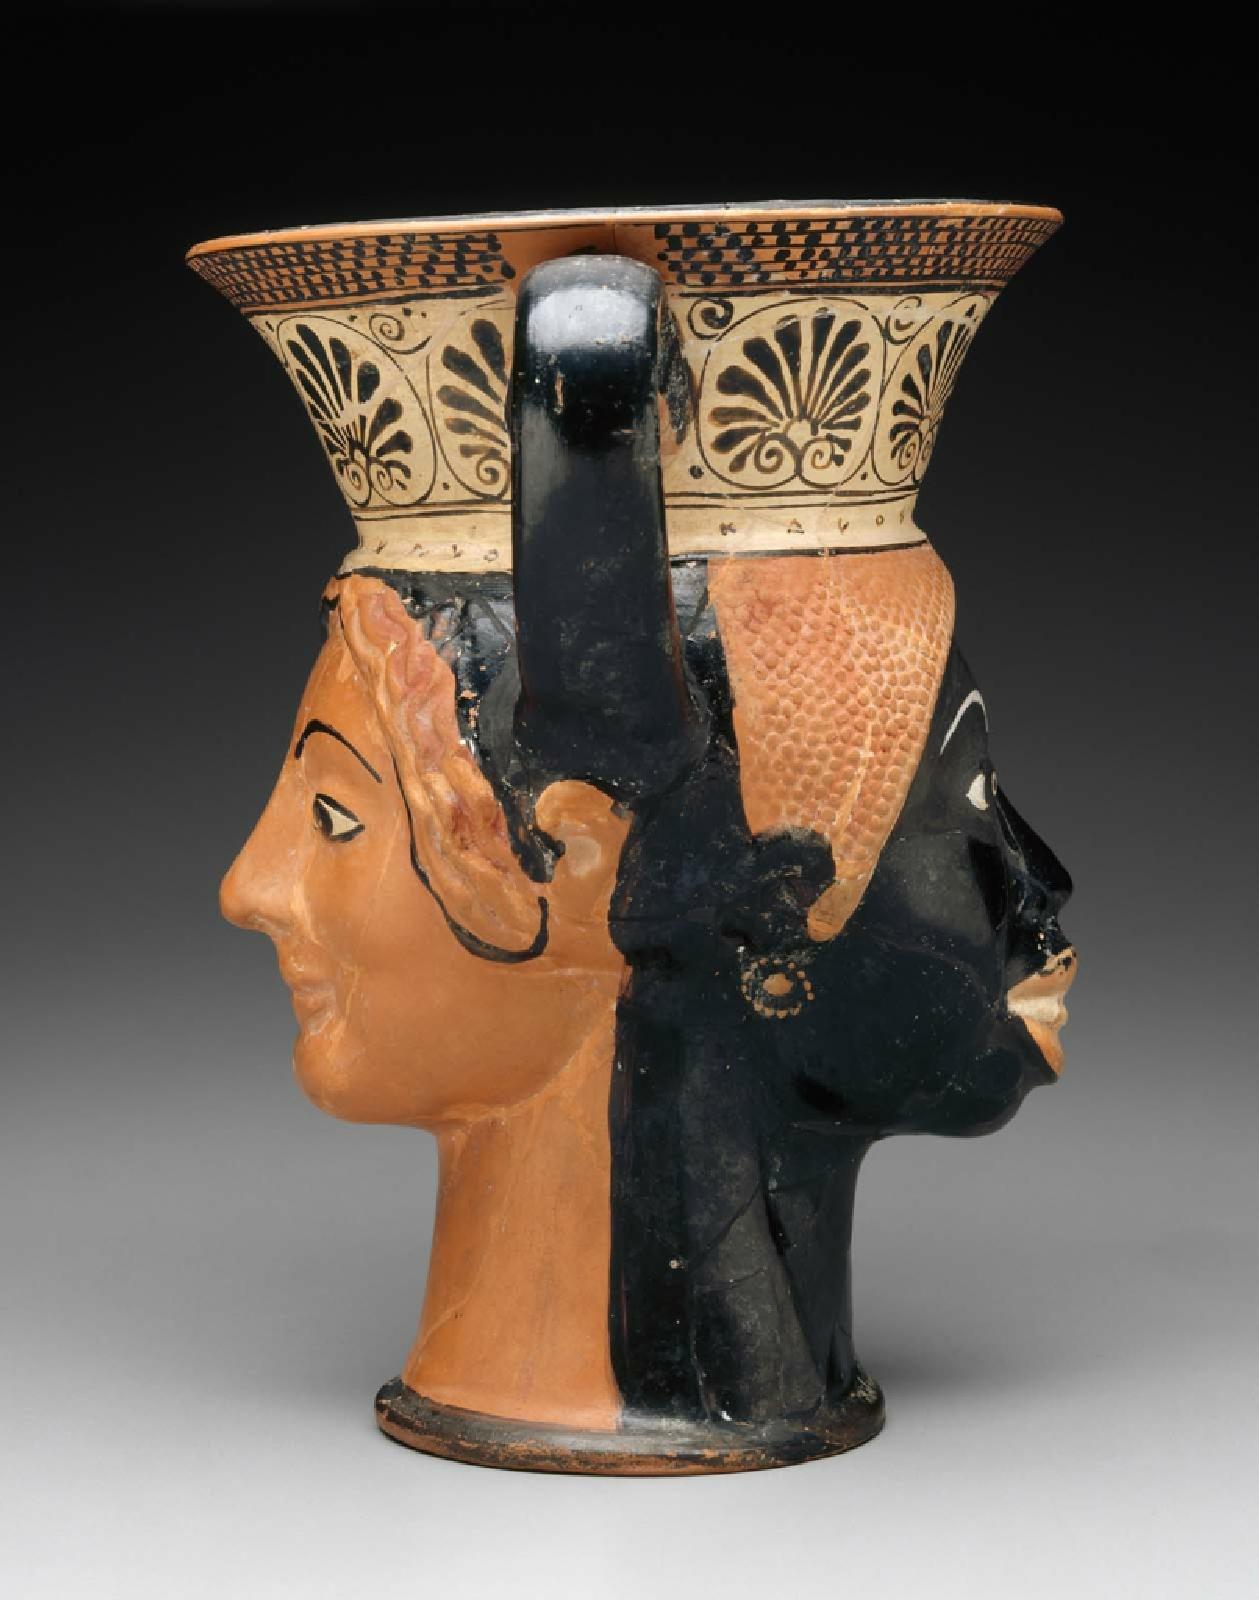 High-Handled Drinking Cup (Kantharos) in the Form of Two Heads, about 510–480 B.C.E., the London Class. Terracotta, 7 9/16 inches high (Museum of Fine Arts, Boston, Henry Lillie Pierce Fund)